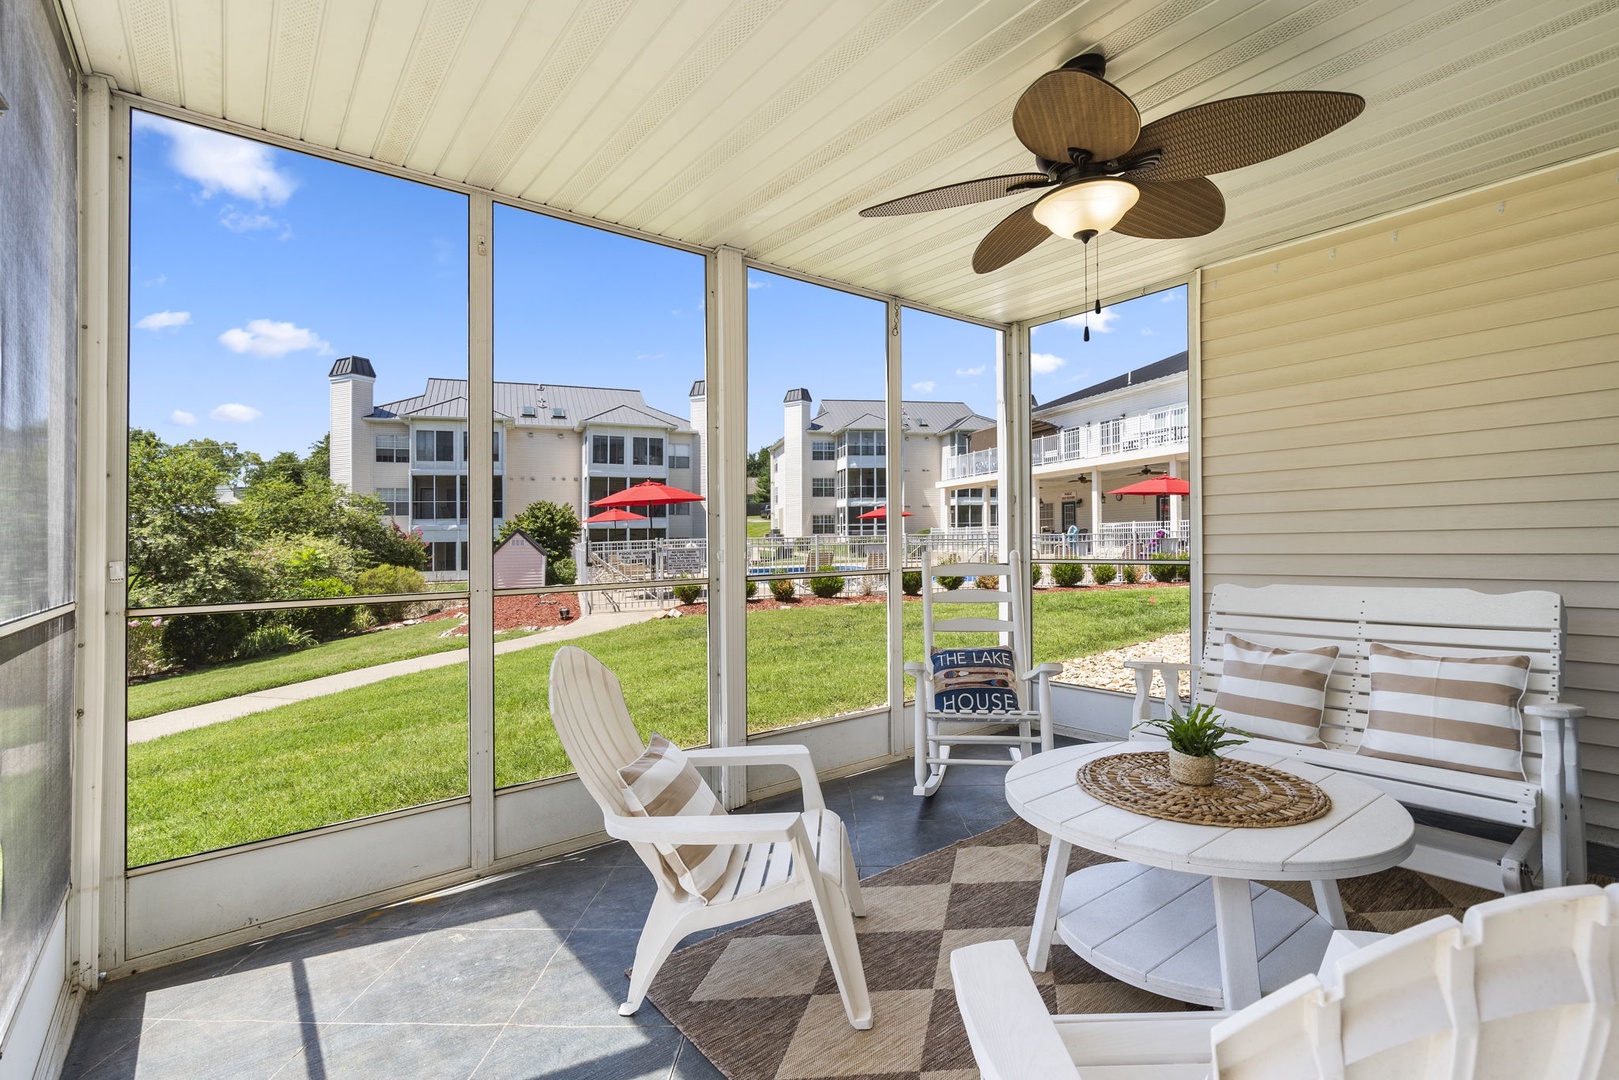 Enjoy dining & lounging with a view on the screened-in patio